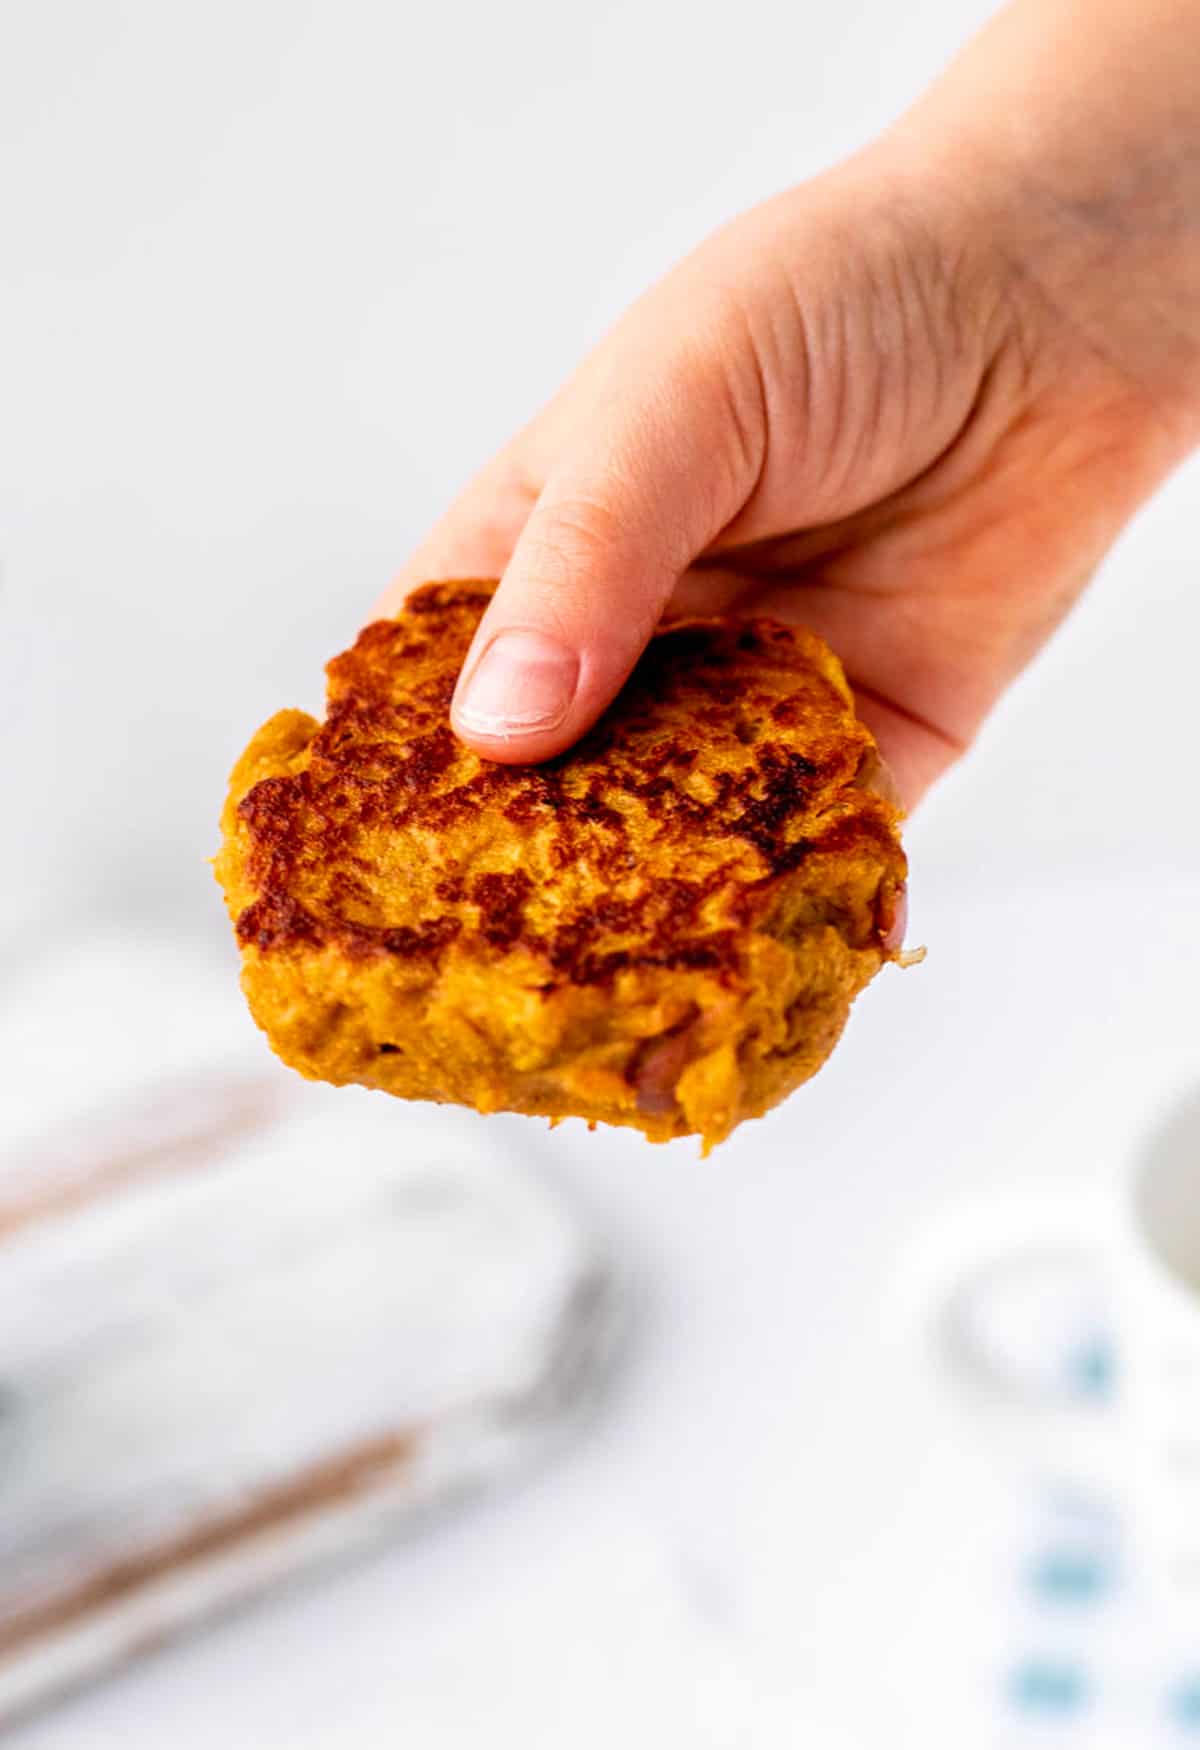 A child's hand holding a sweet potato fritter.